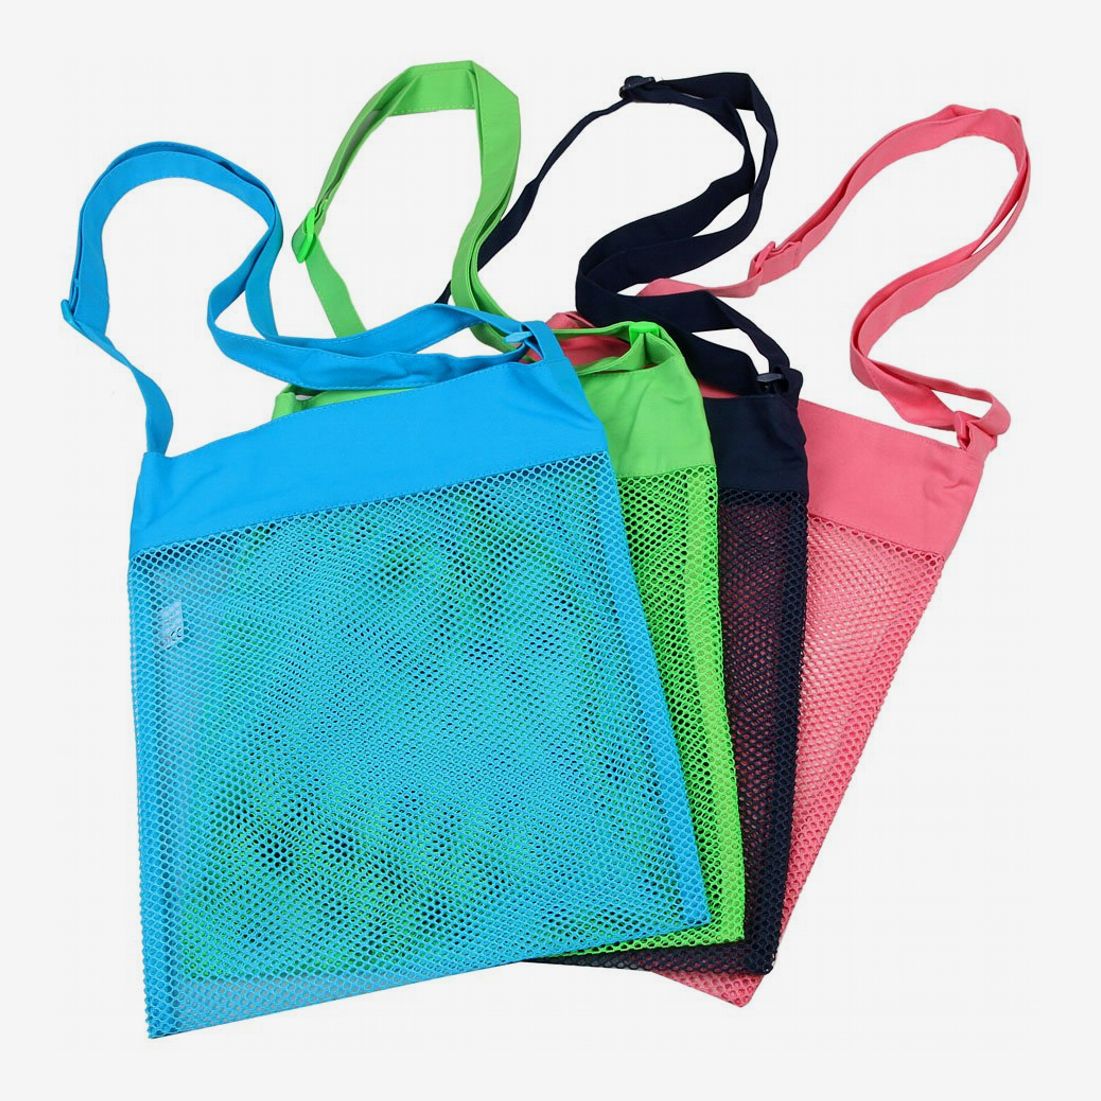 Family Picnic Pool fishing Mesh Beach Bags and Totes for Women,MOVTOTOP Oversized Mesh Beach Bags of 39L ，Beach Bag with Extra 8 Pockets Perfect to Carry All Items for Your Family to Beach